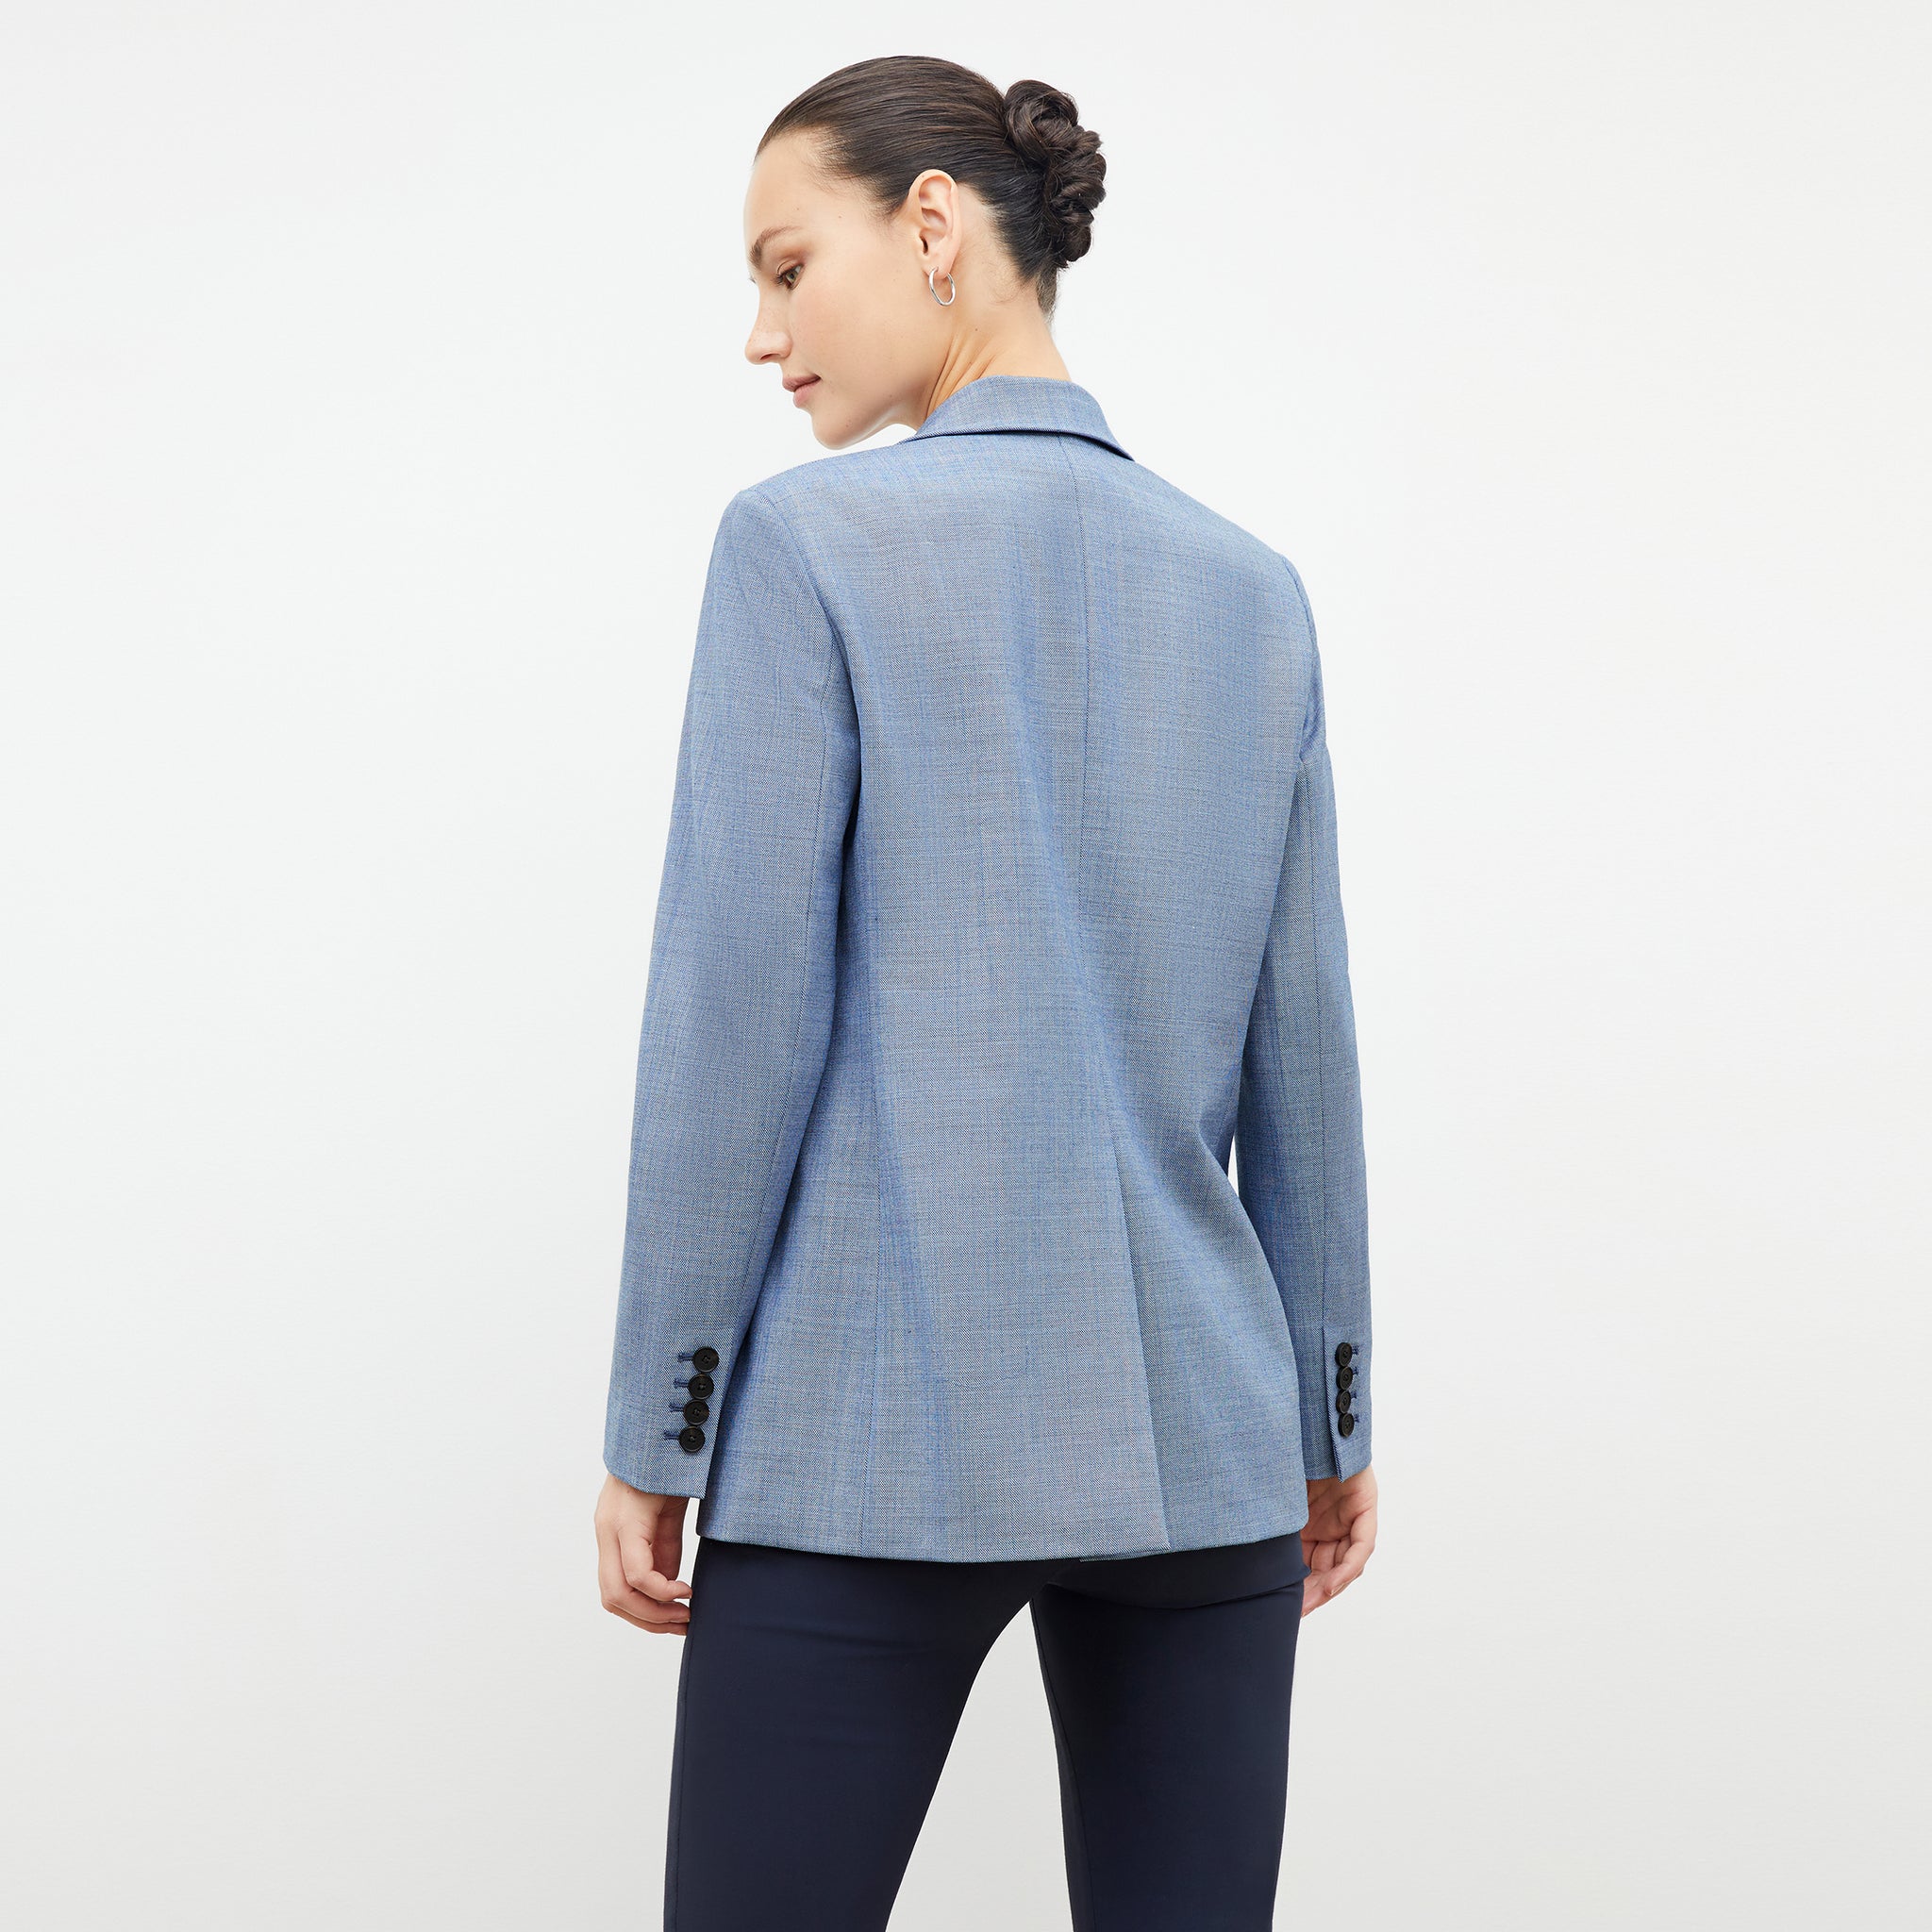 Back image of a woman wearing the ohara blazer in indigo and white